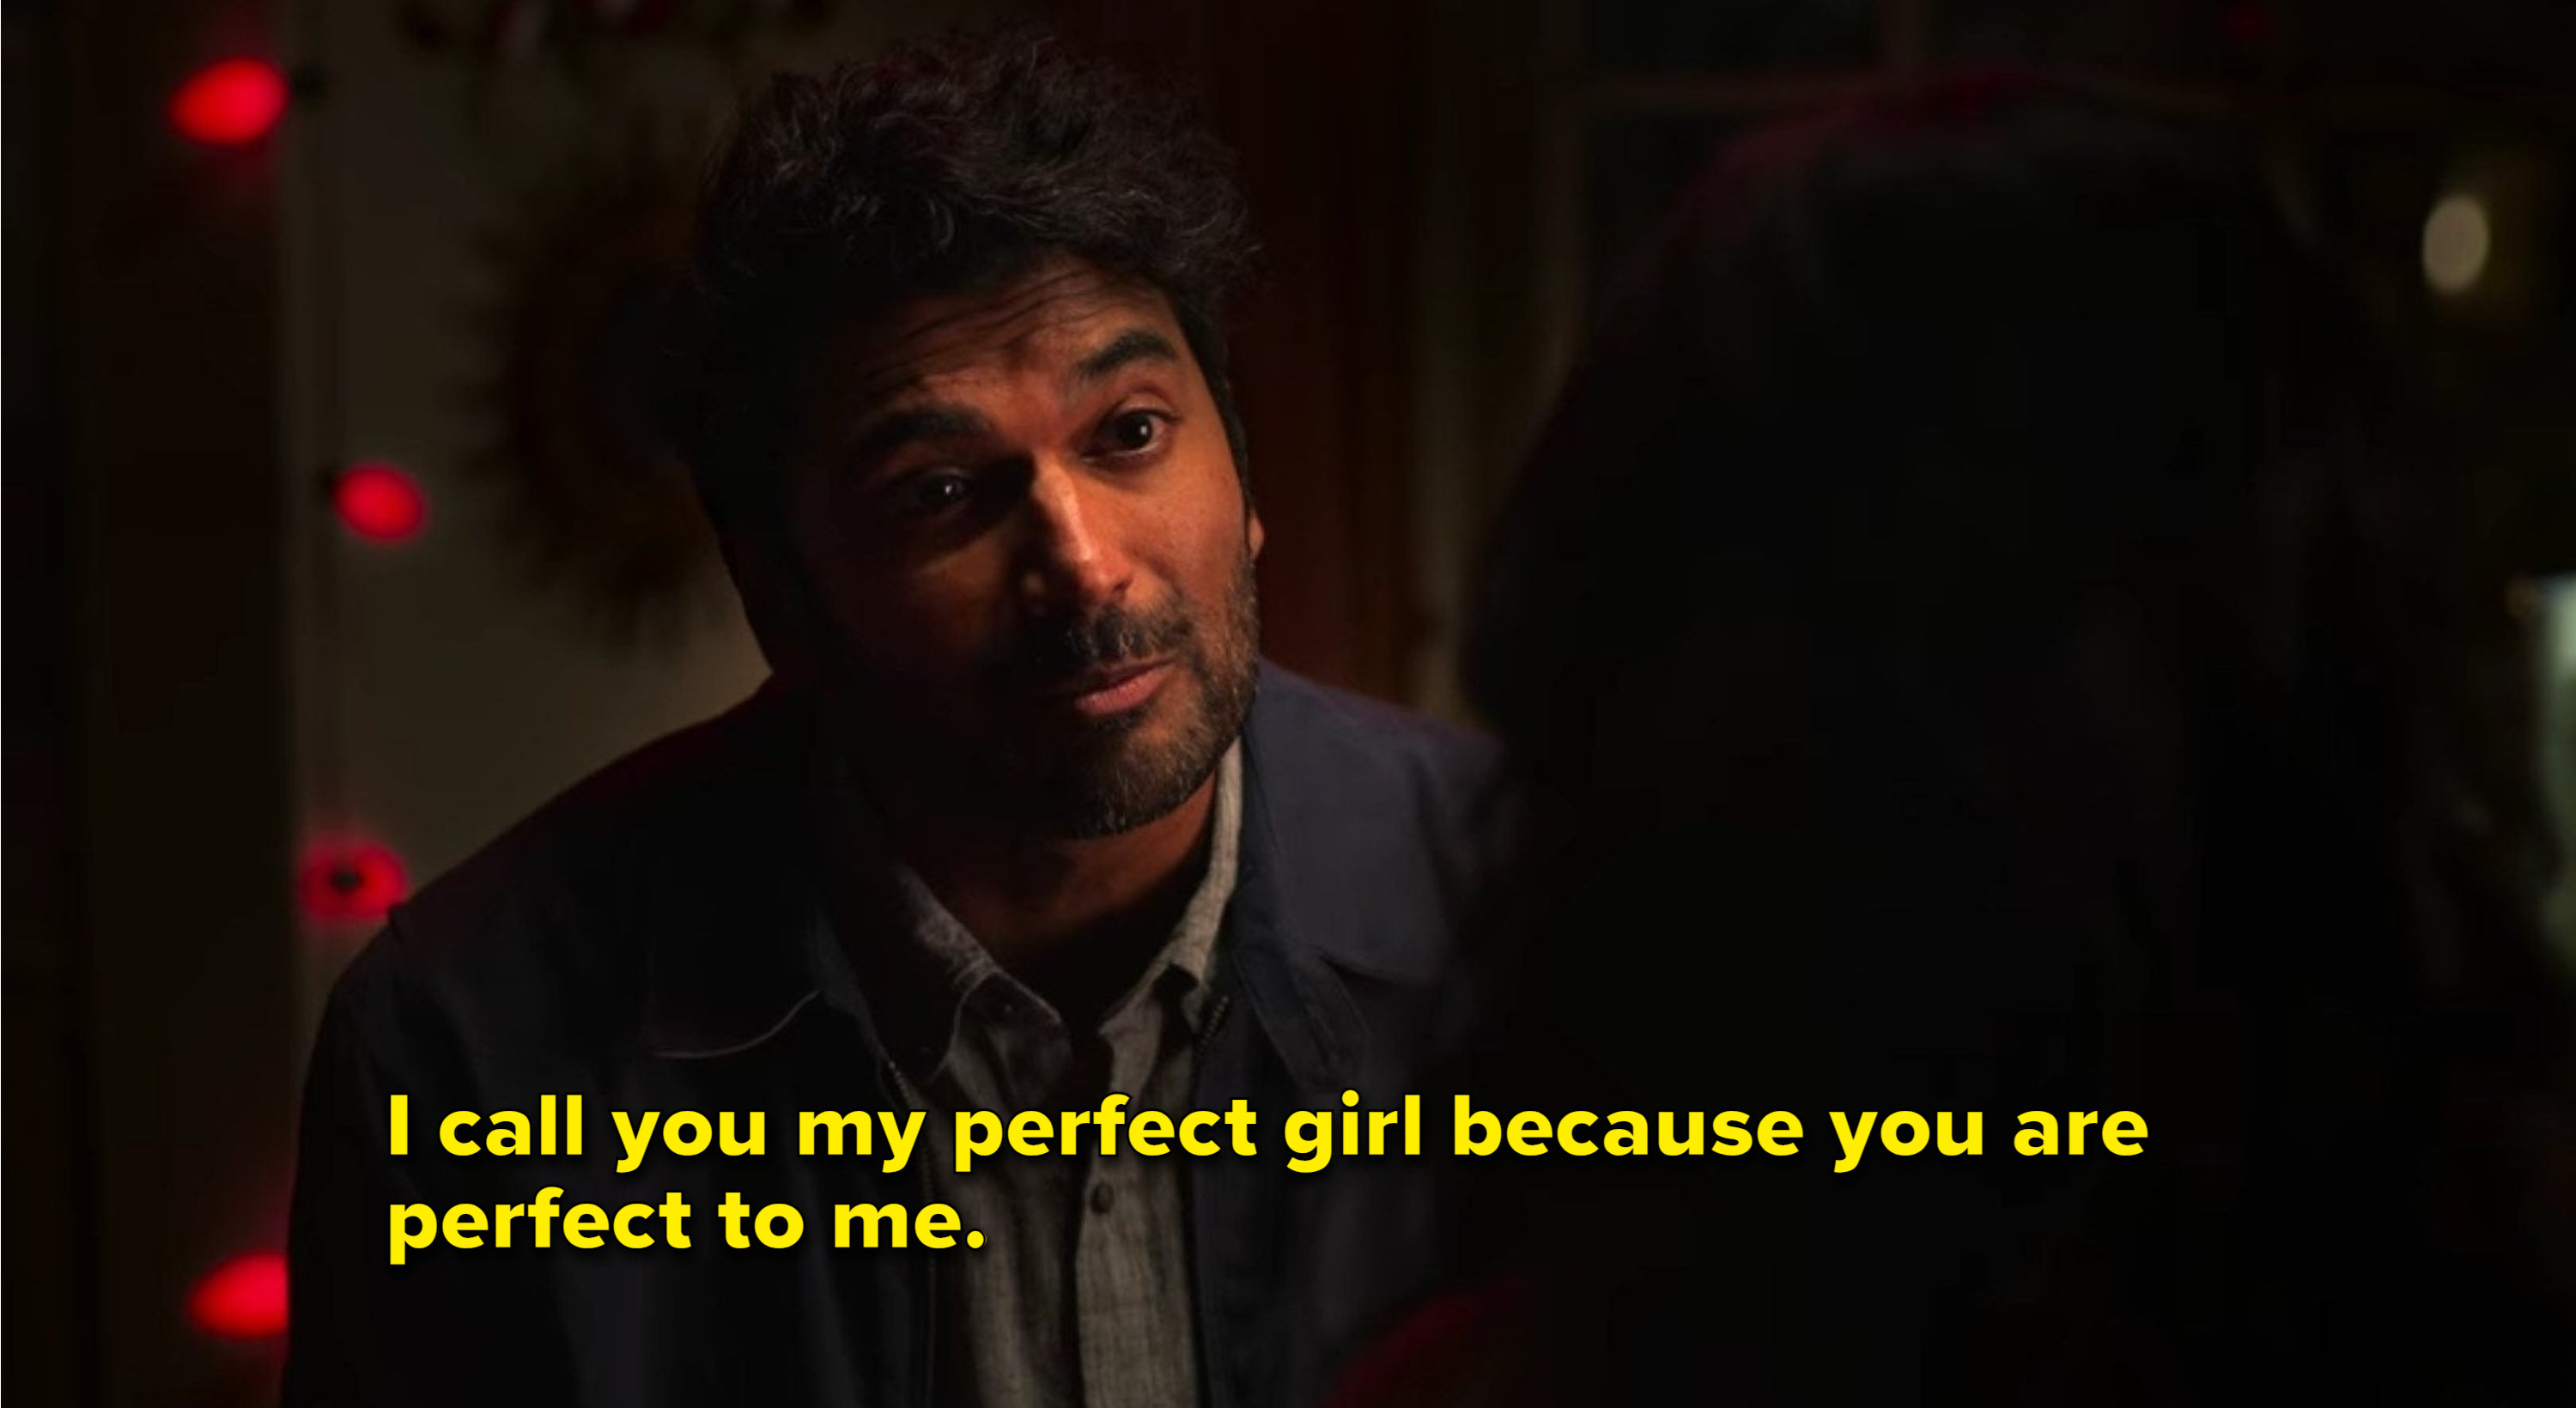 Devi&#x27;s dad tells her she&#x27;s perfect